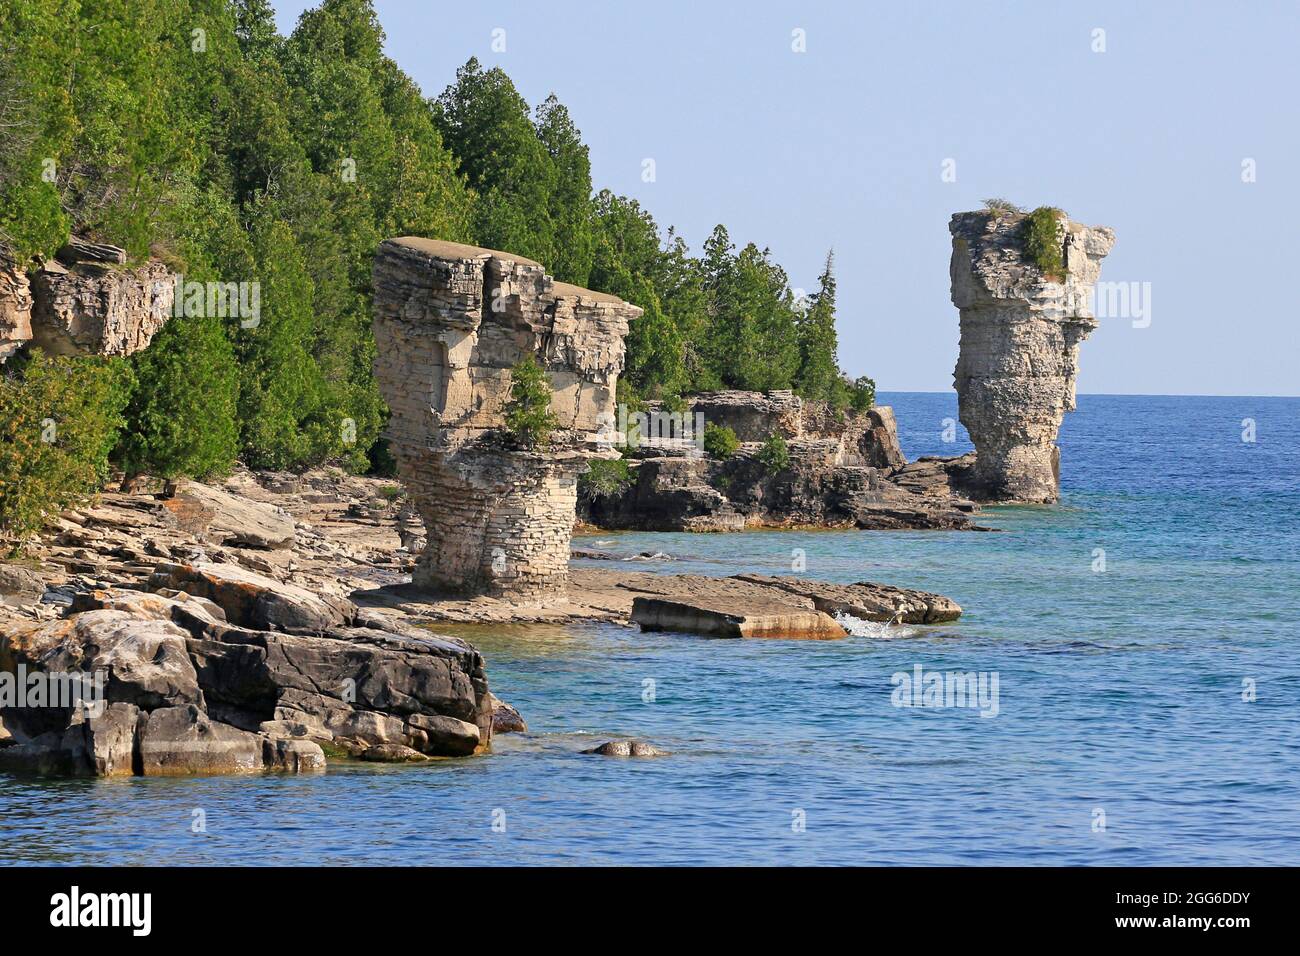 The two rock pillars rise from the waters of Georgian Bay on Flowerpot island in Fathom Five National Marine Park, Lake Huron, Canada Stock Photo